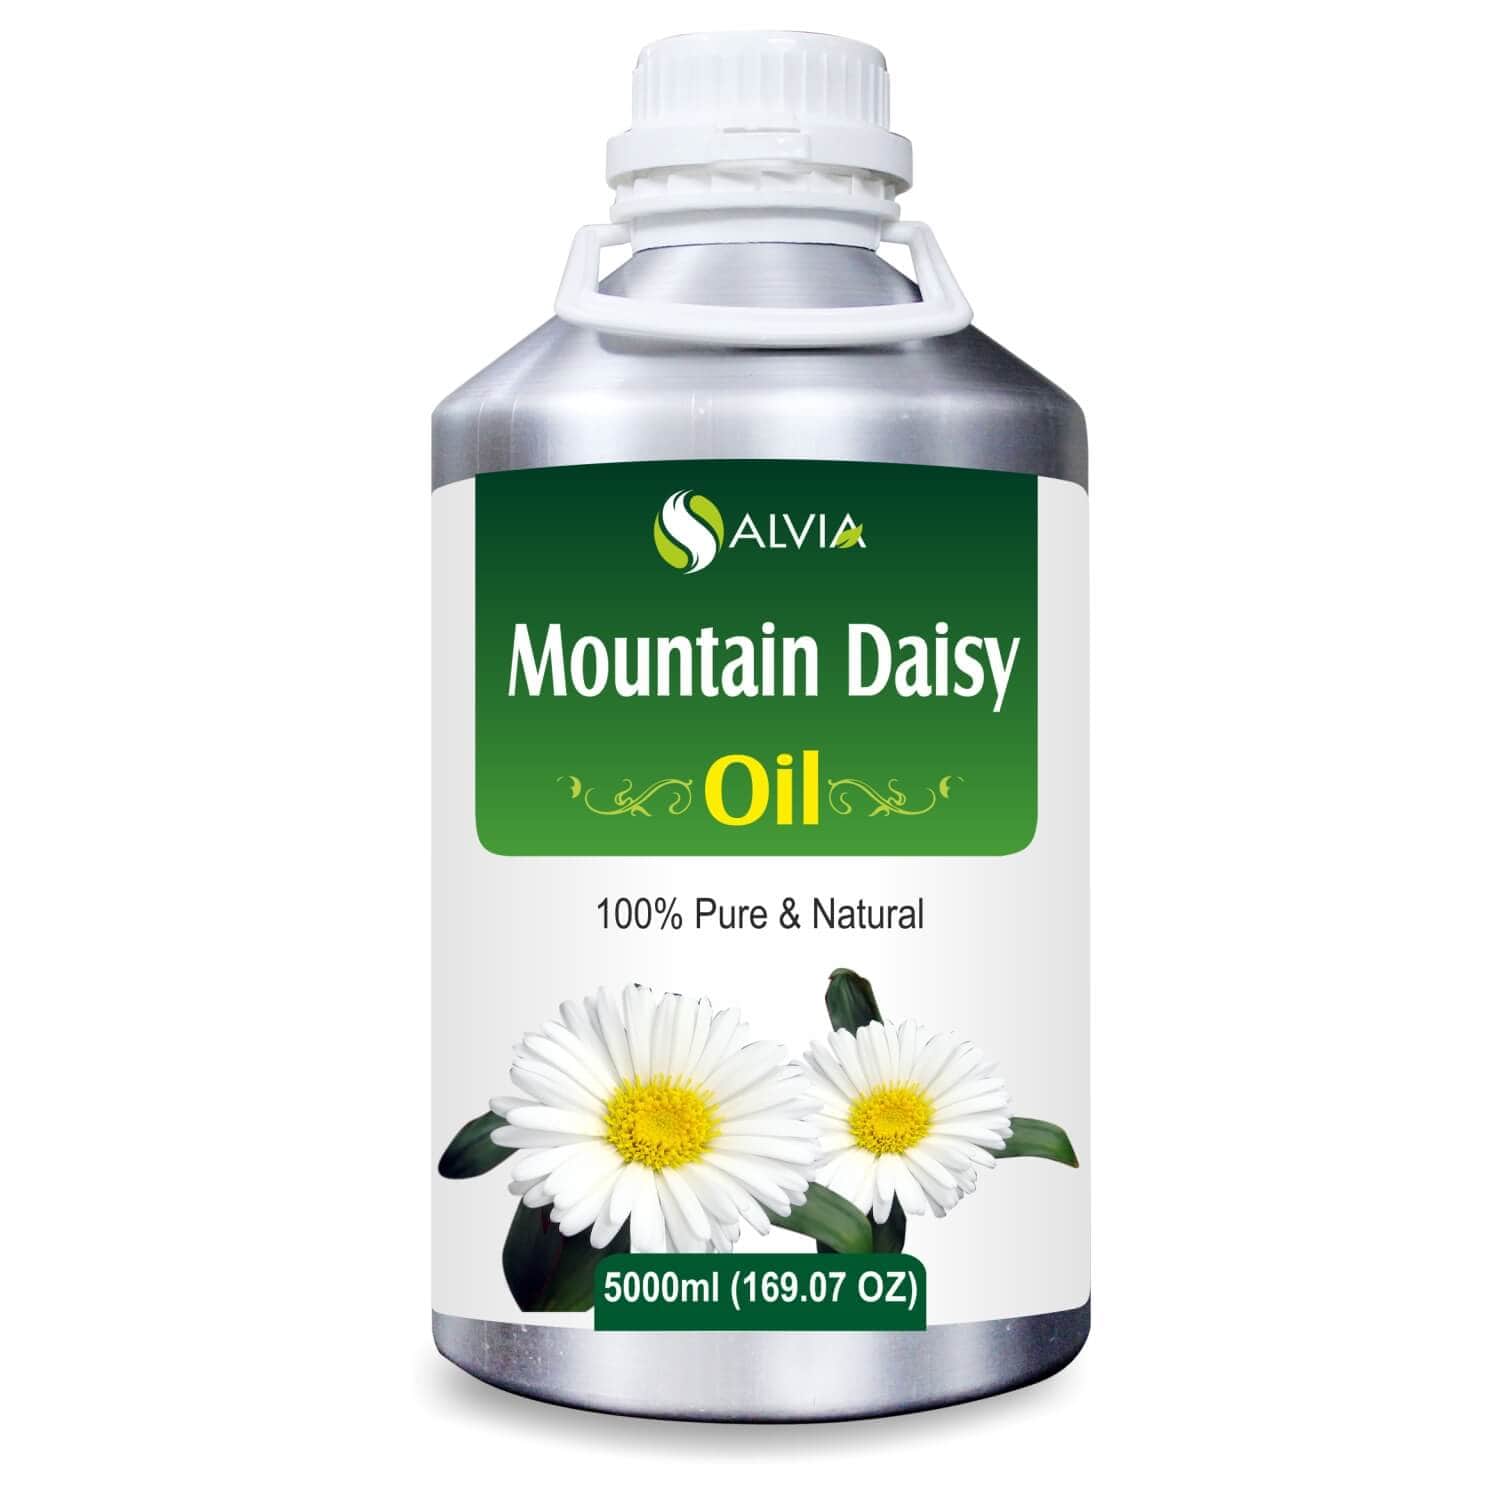 Salvia Natural Essential Oils 5000ml Mountain Daisy Oil (Celmisia semicordata) 100% Natural Pure Essential Oil Soothes Bruises, Open Wounds, Pain Reliever, SkinCare & HairCare, Anti-Oxidant